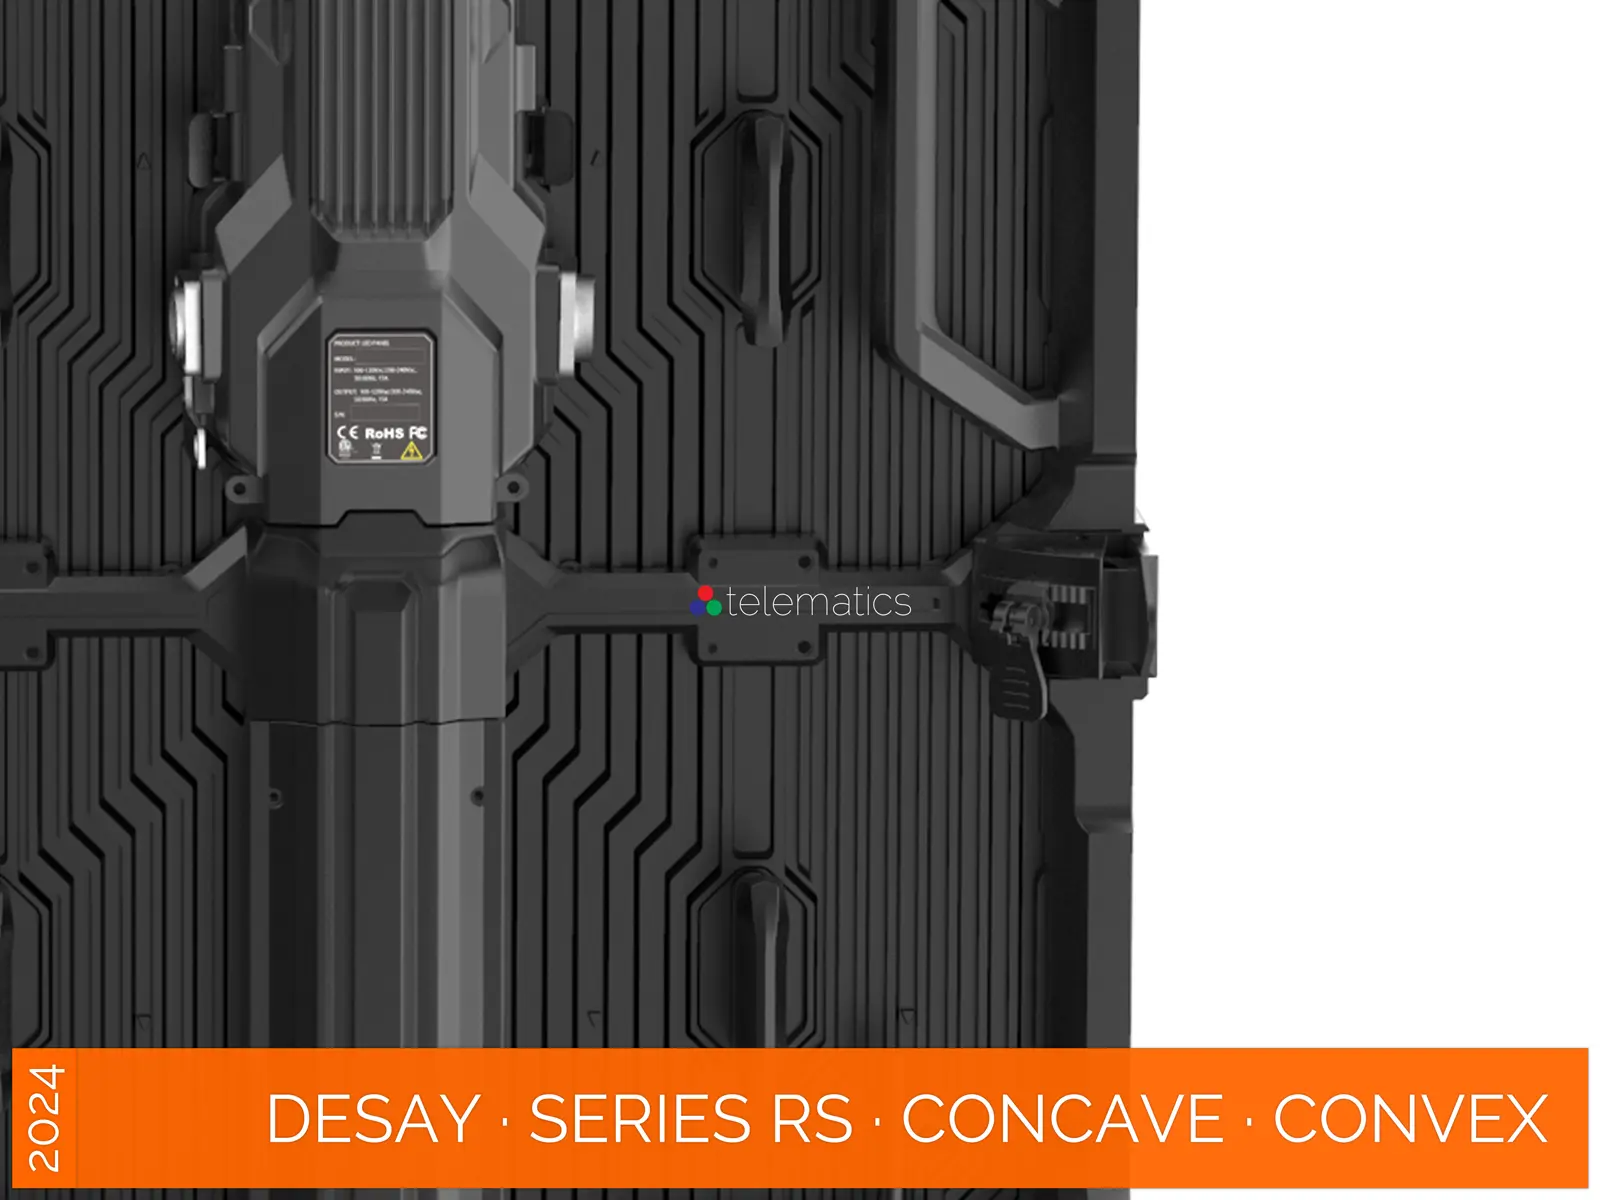 Desay · Series RS · Direct View LED Display Panel · Full Pixel Range · Rental Or Stage · Indoor Rated · Rapid Service And Setup · Integrated Concave And Convex Curve To 10 Degrees · NovaStar COEX MX CX · Vision Management Platform · Viplex · review · price · cost · priced from $1,790 per square meter